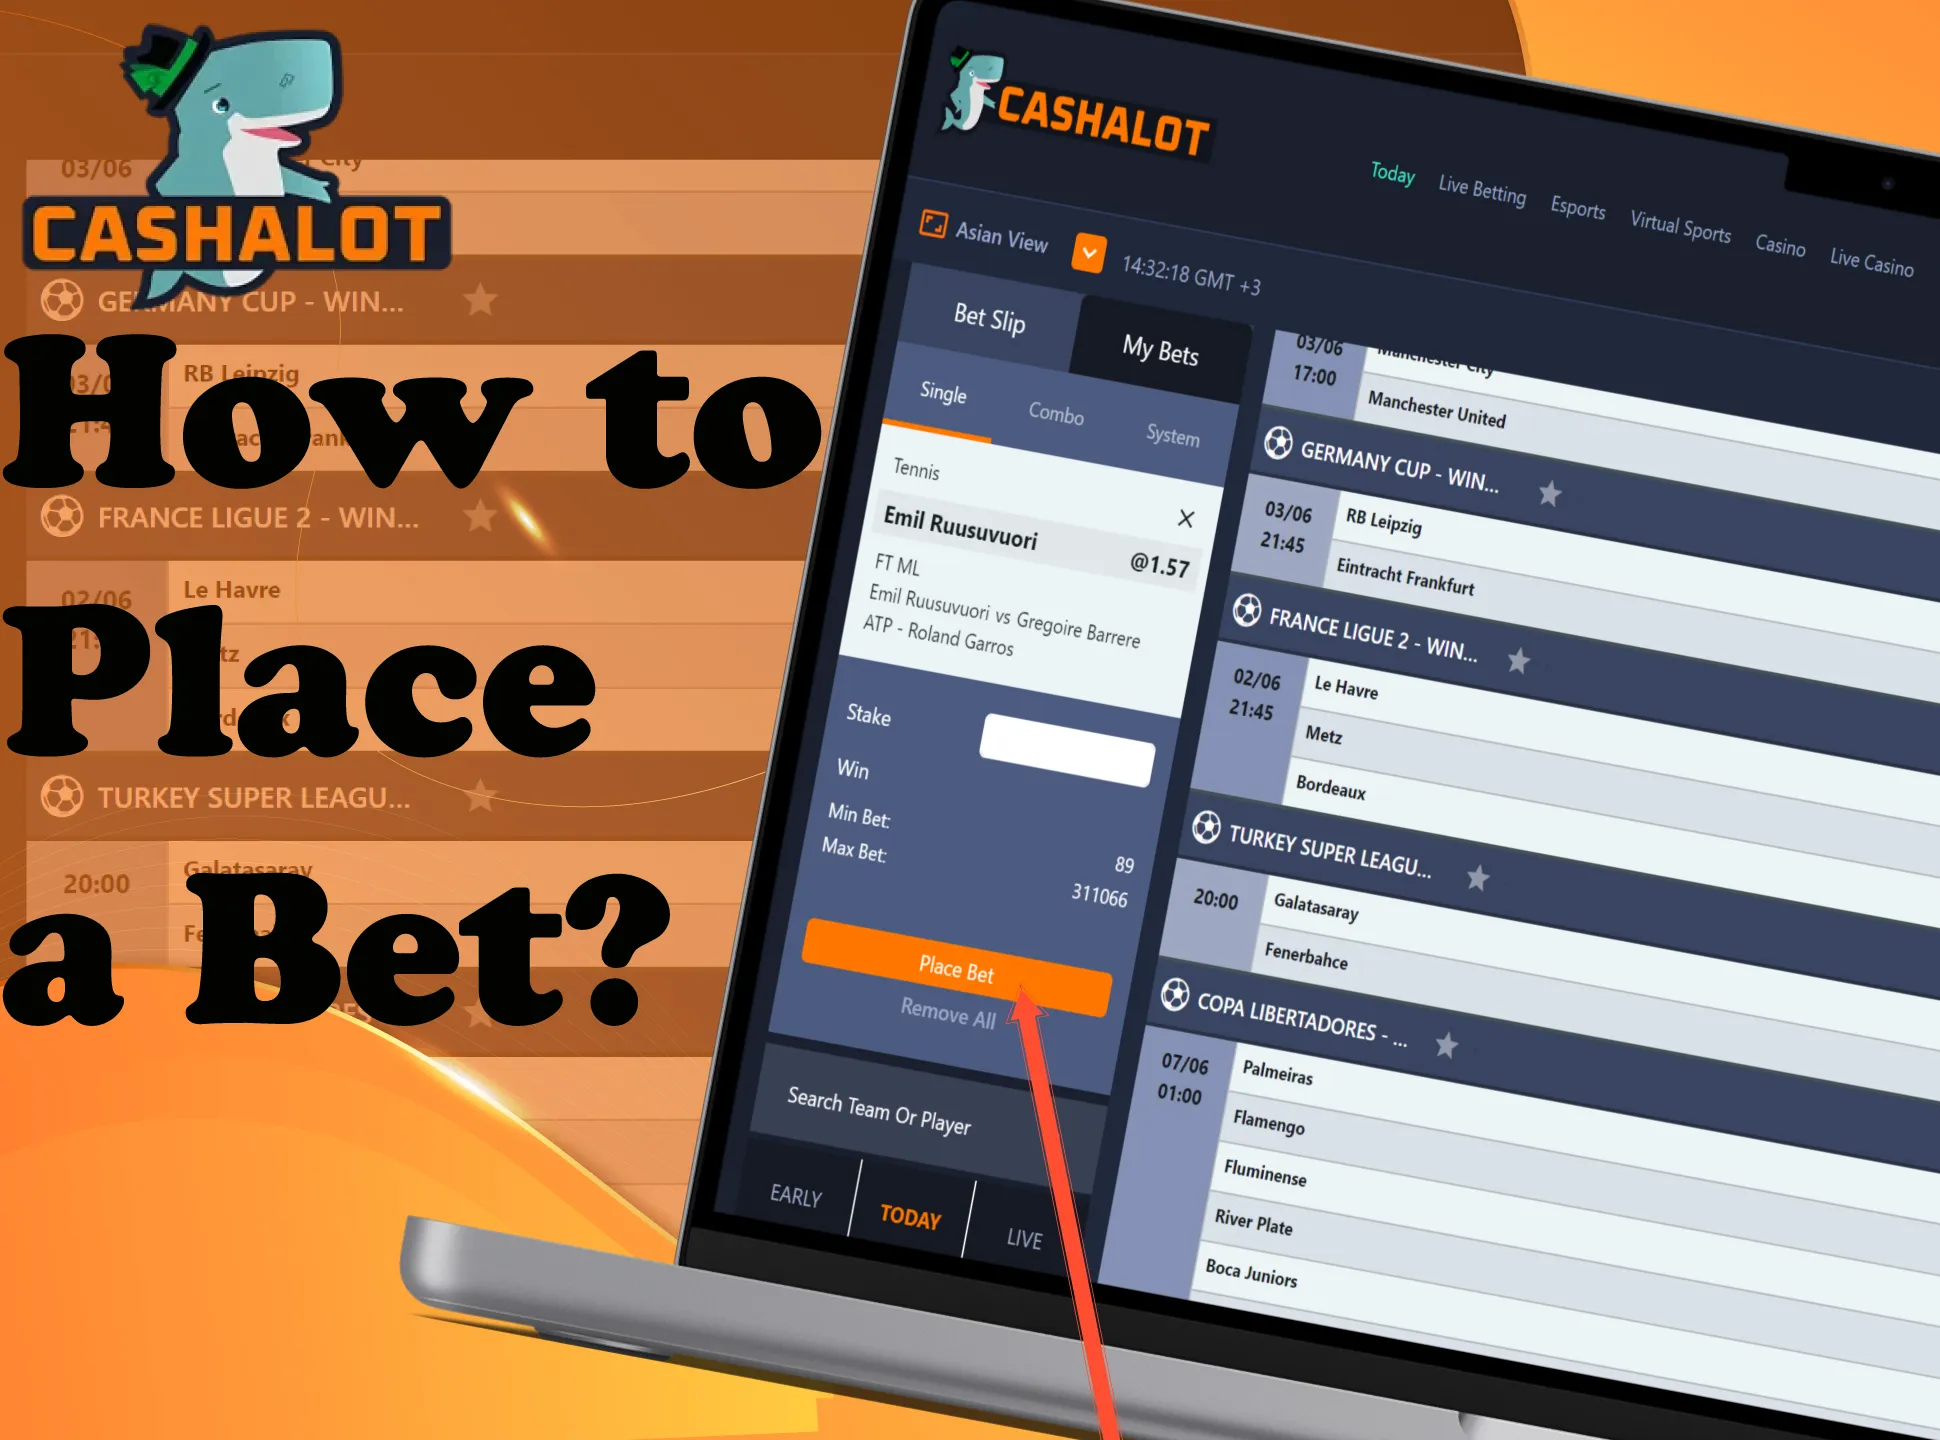 It's easy to make bets at Cashalot.